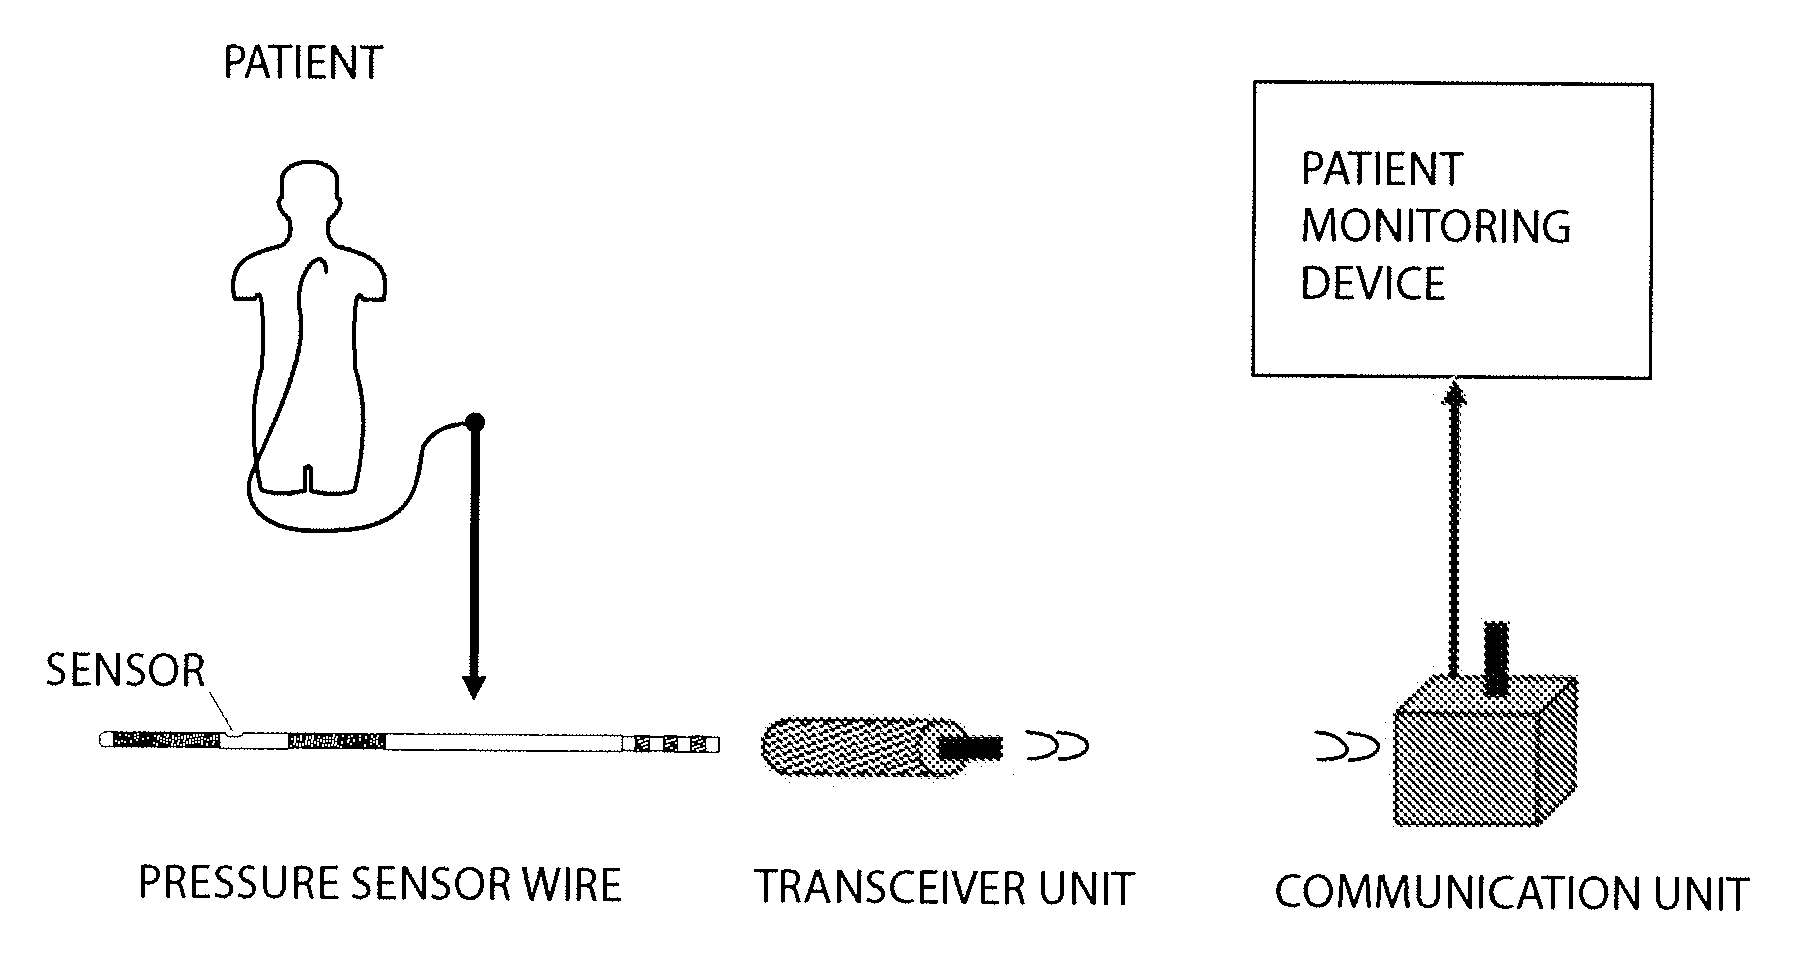 Removable energy source for sensor guidewire